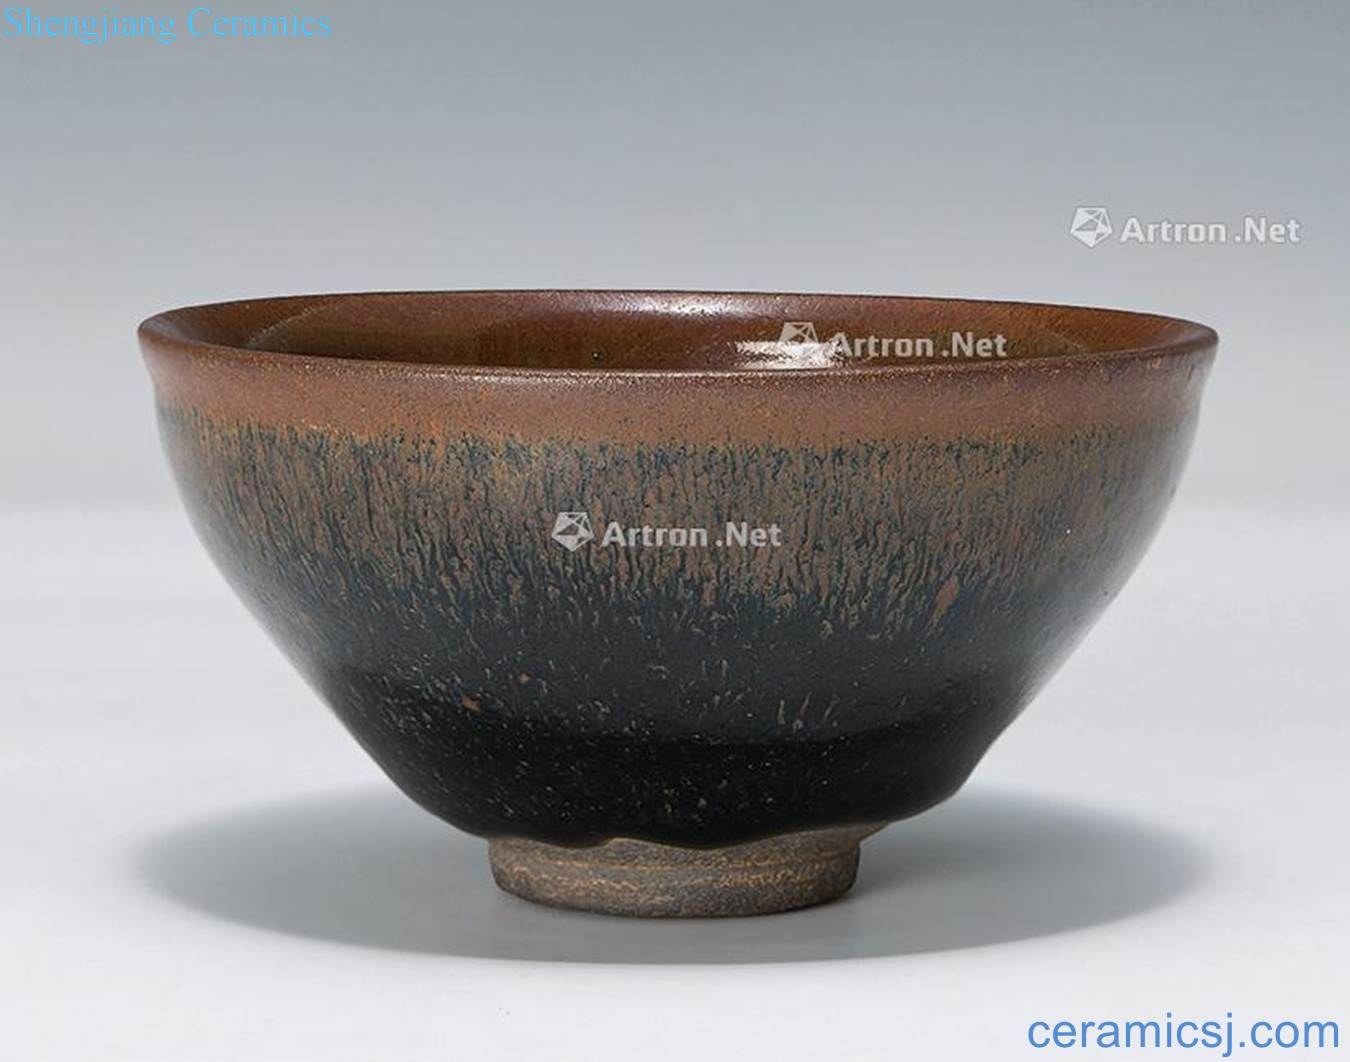 The song dynasty to build kilns bowl